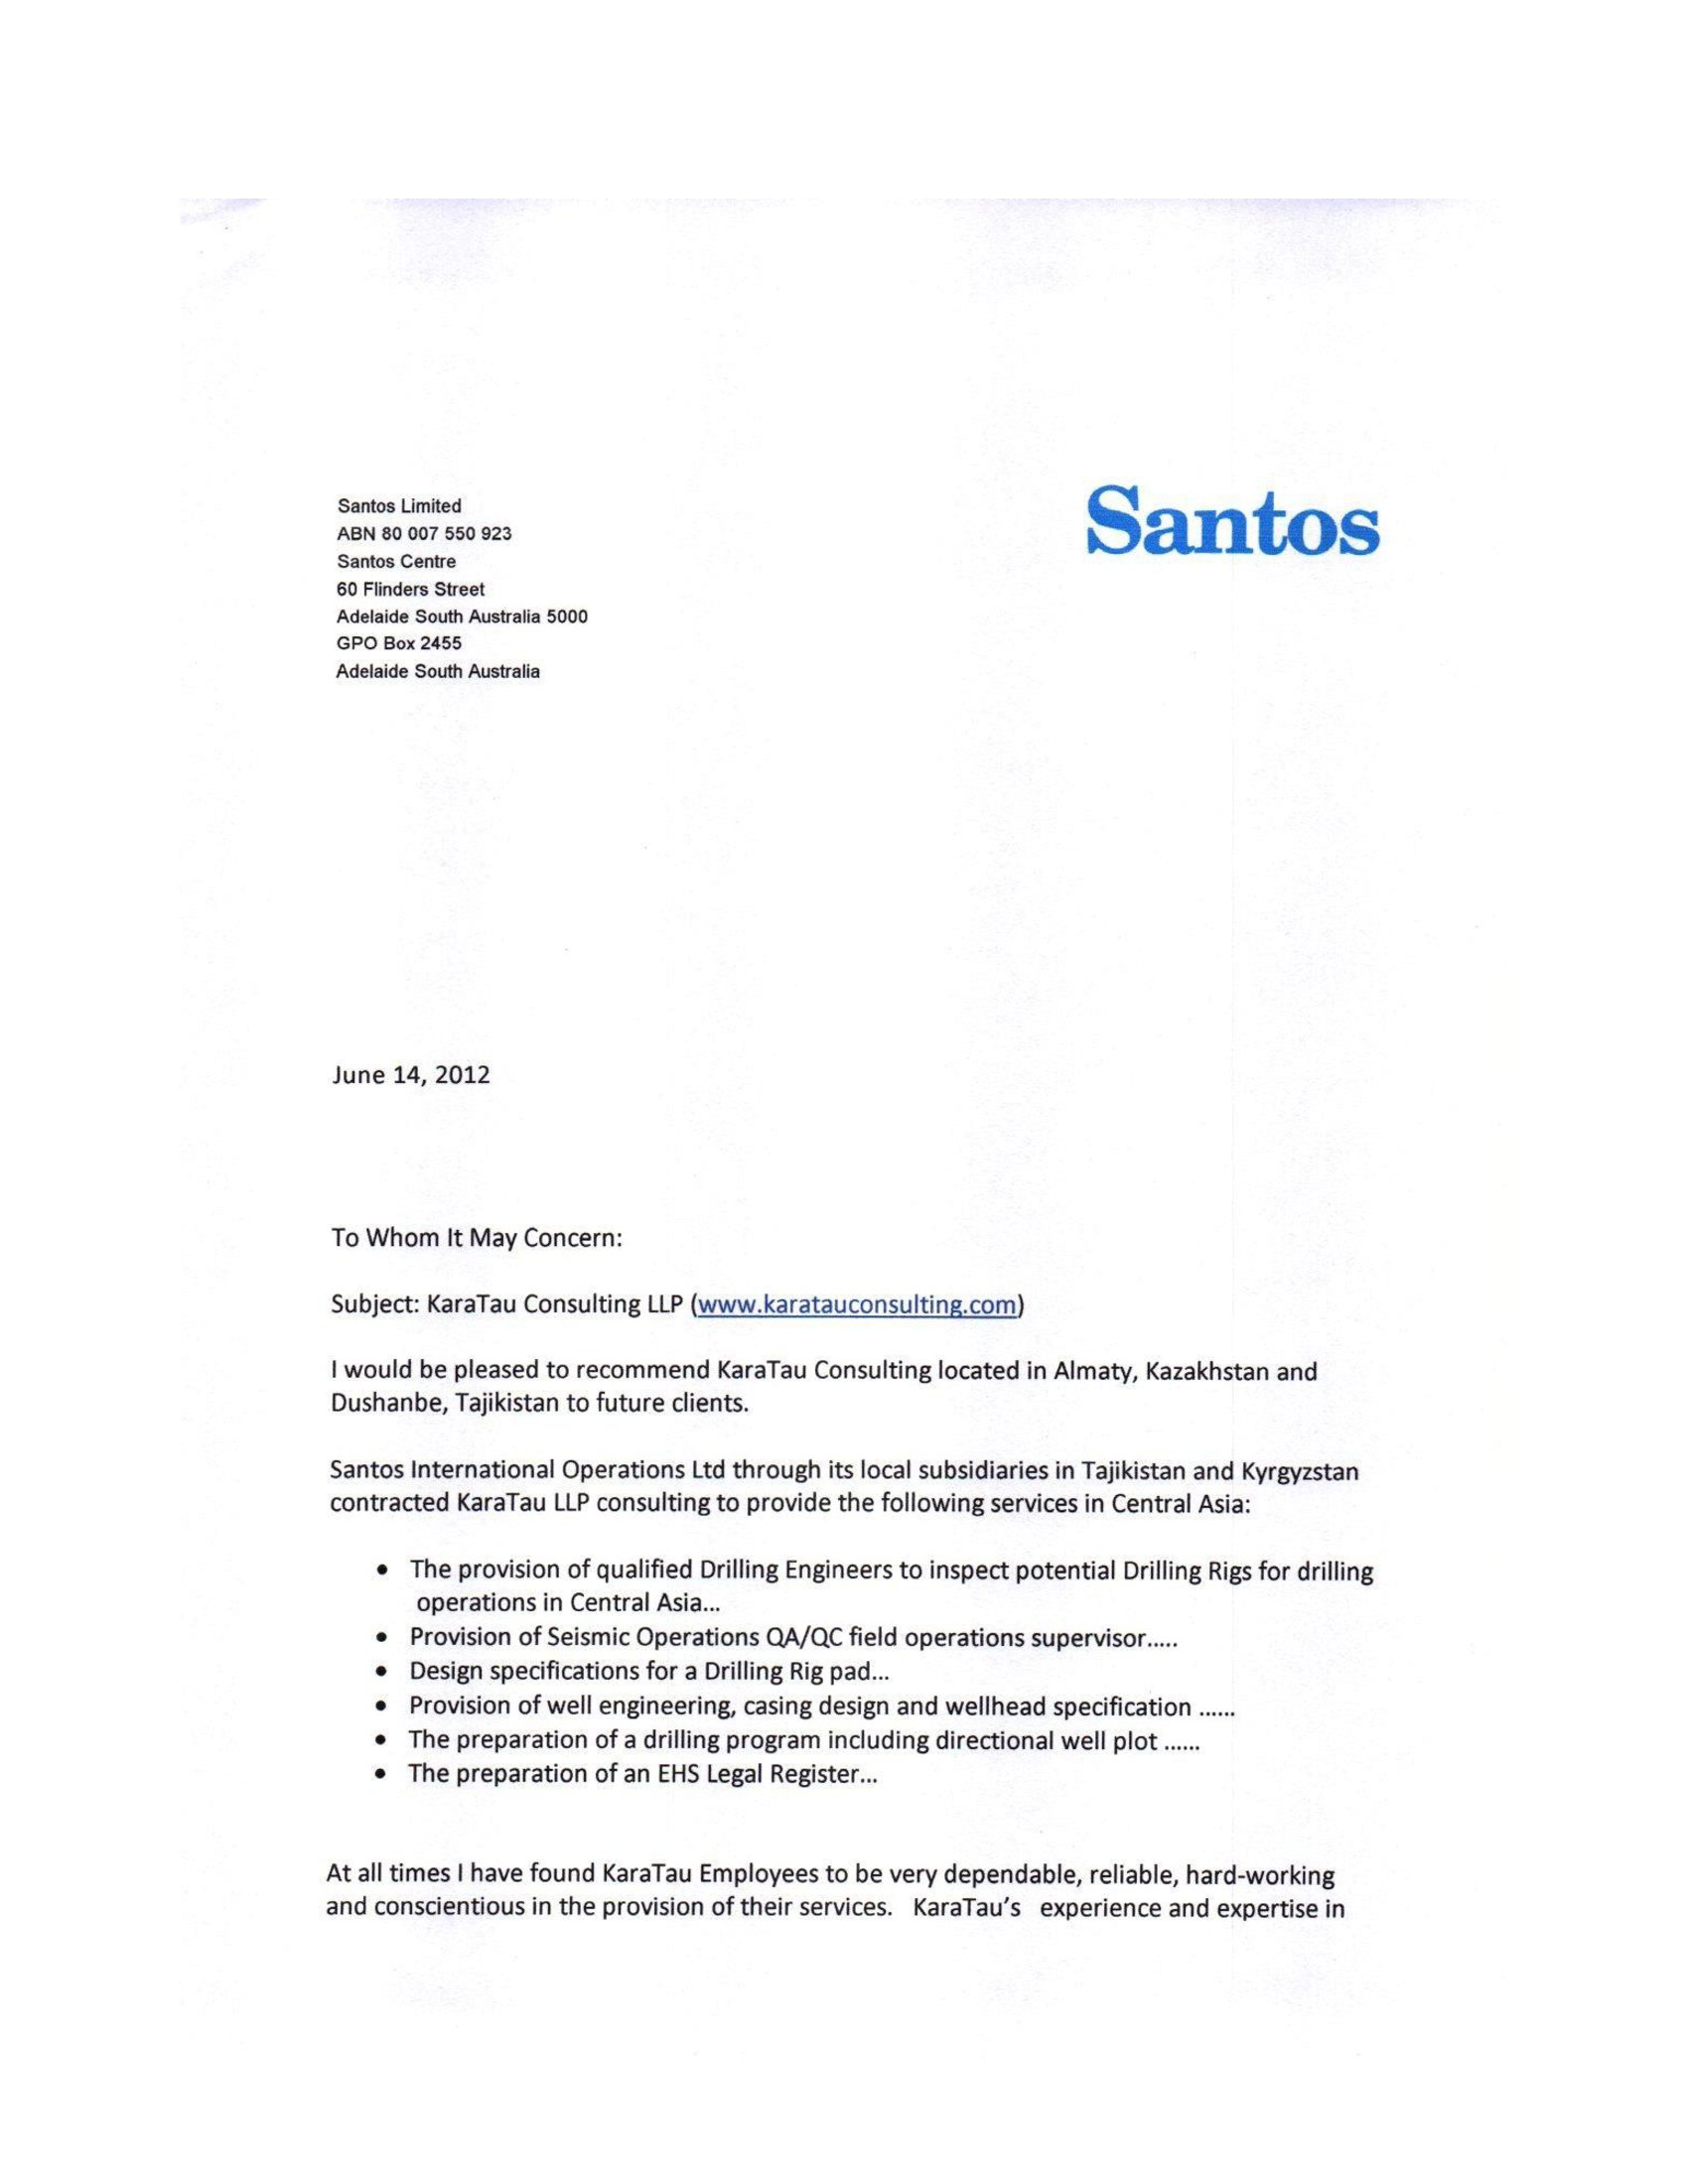 Reference Letter From Santos Karatau Consulting in size 1700 X 2200